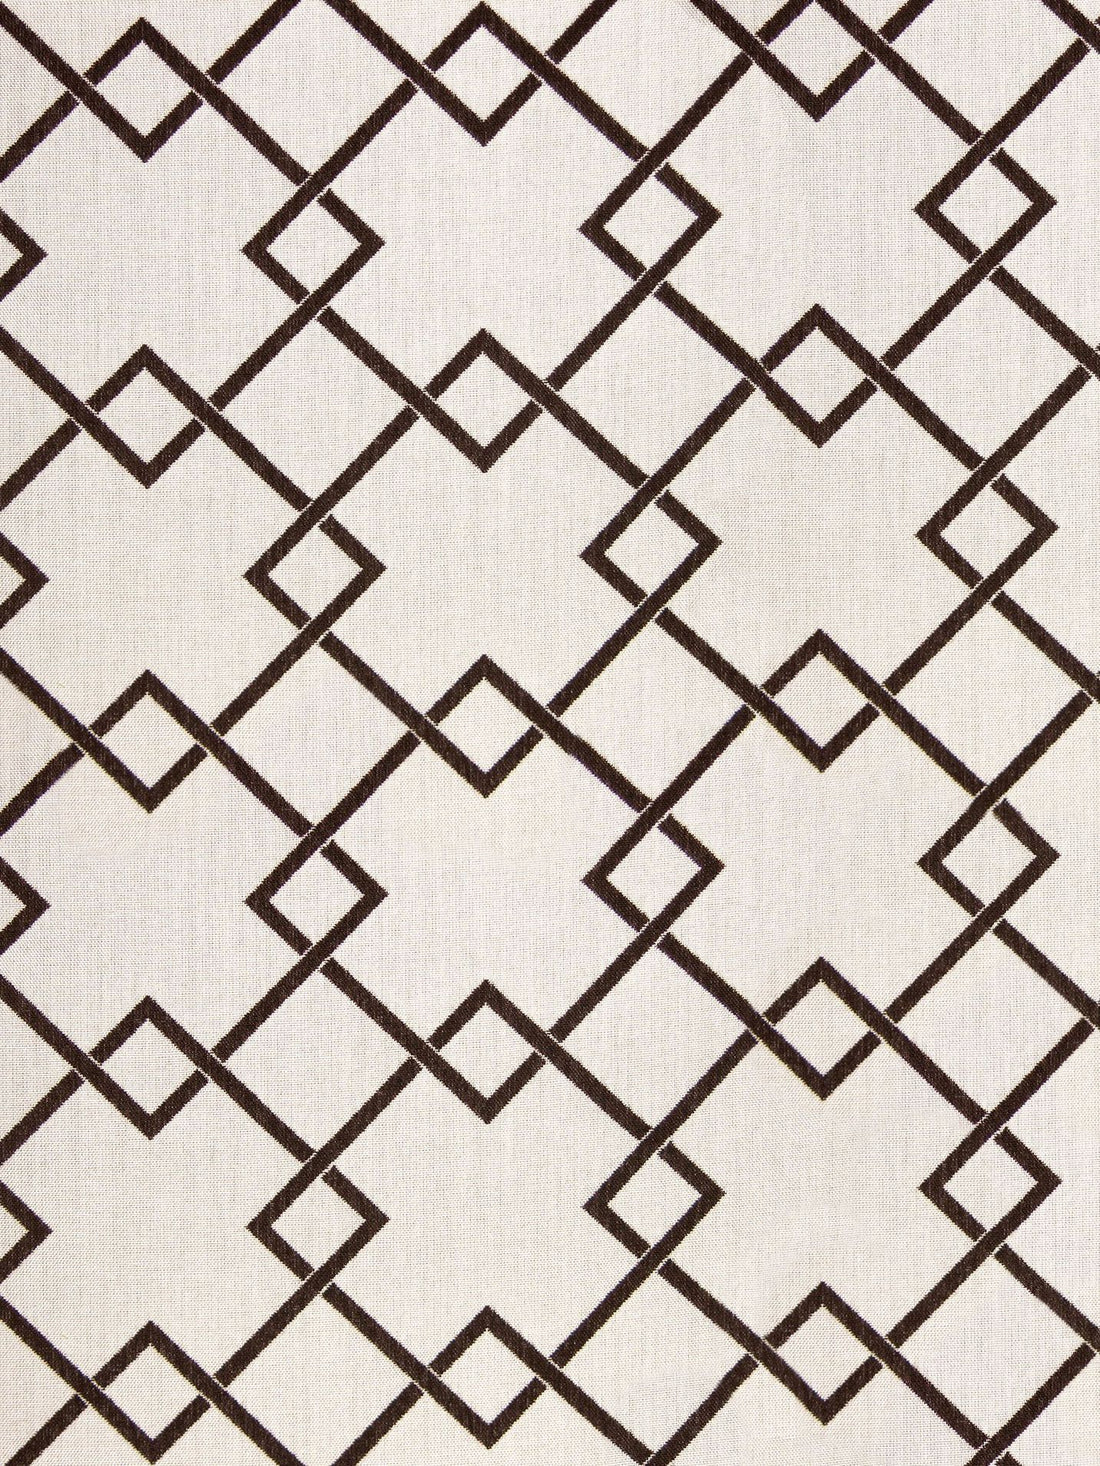 Hope Diamond fabric in fudge color - pattern number SU 0001P839 - by Scalamandre in the Old World Weavers collection